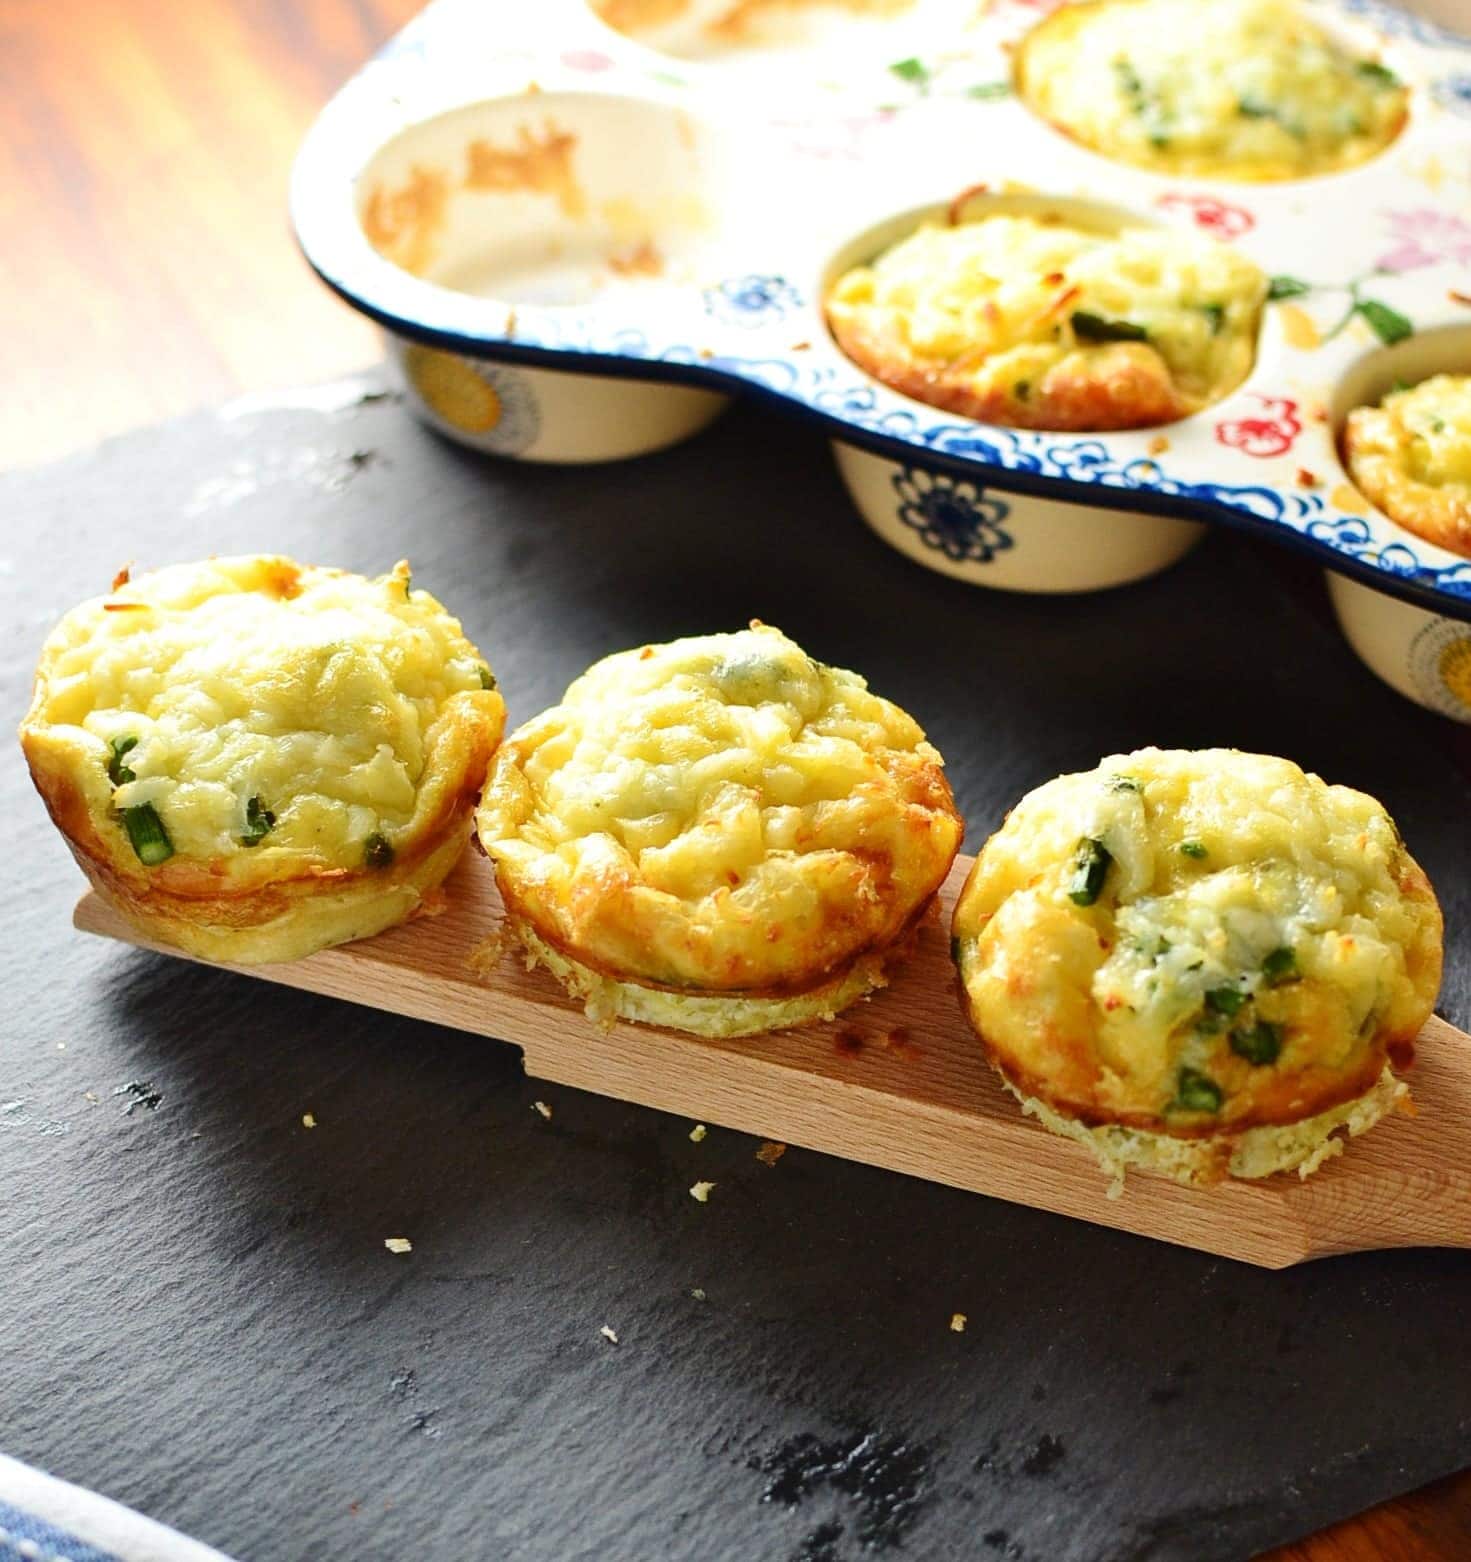 Potato asparagus frittata muffins on wooden board with ceramic muffin tin in background on slate surface.